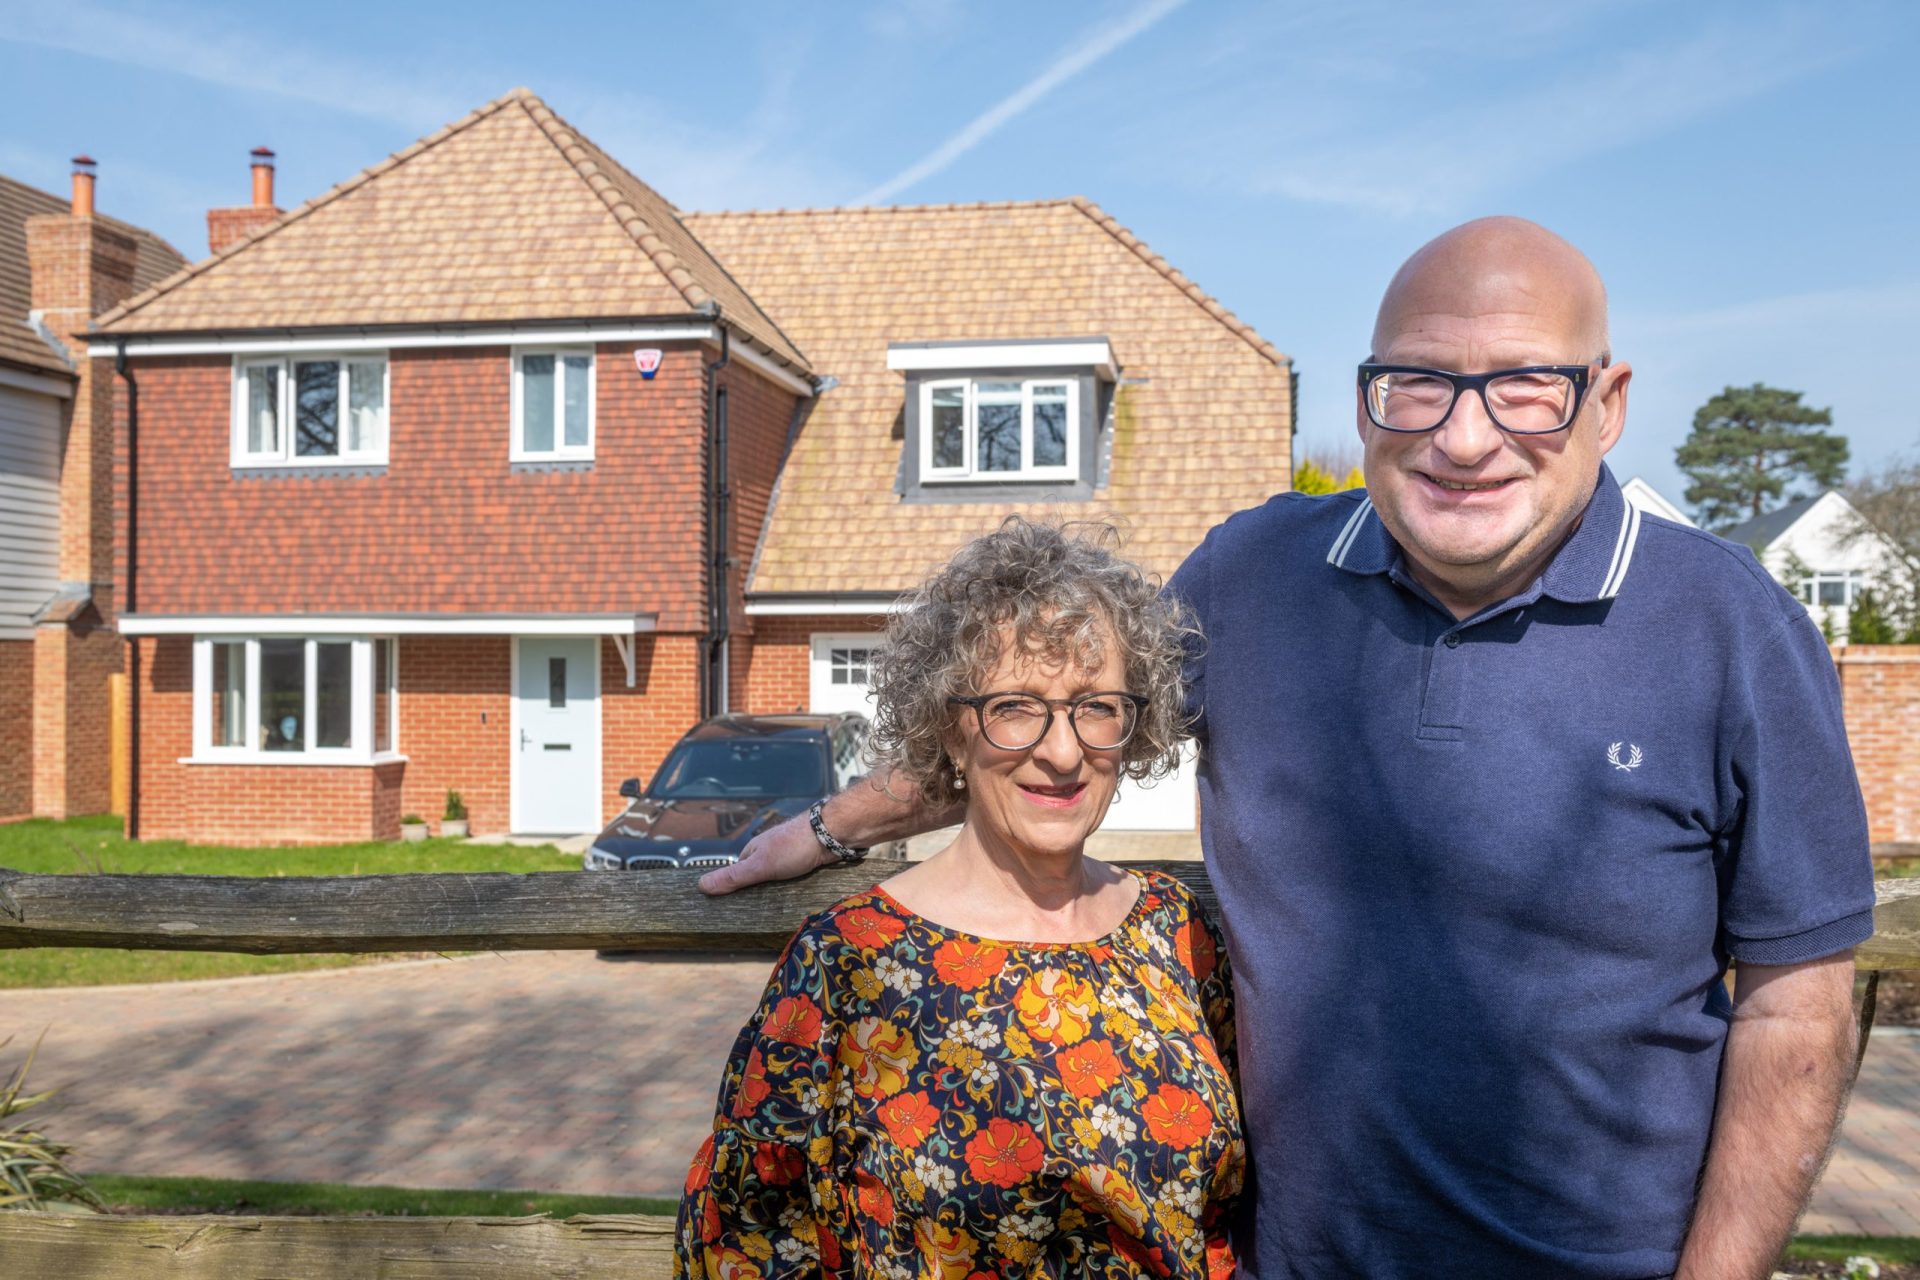 Couple fall in love at first sight with their ‘forever home’ in Burgess Hill